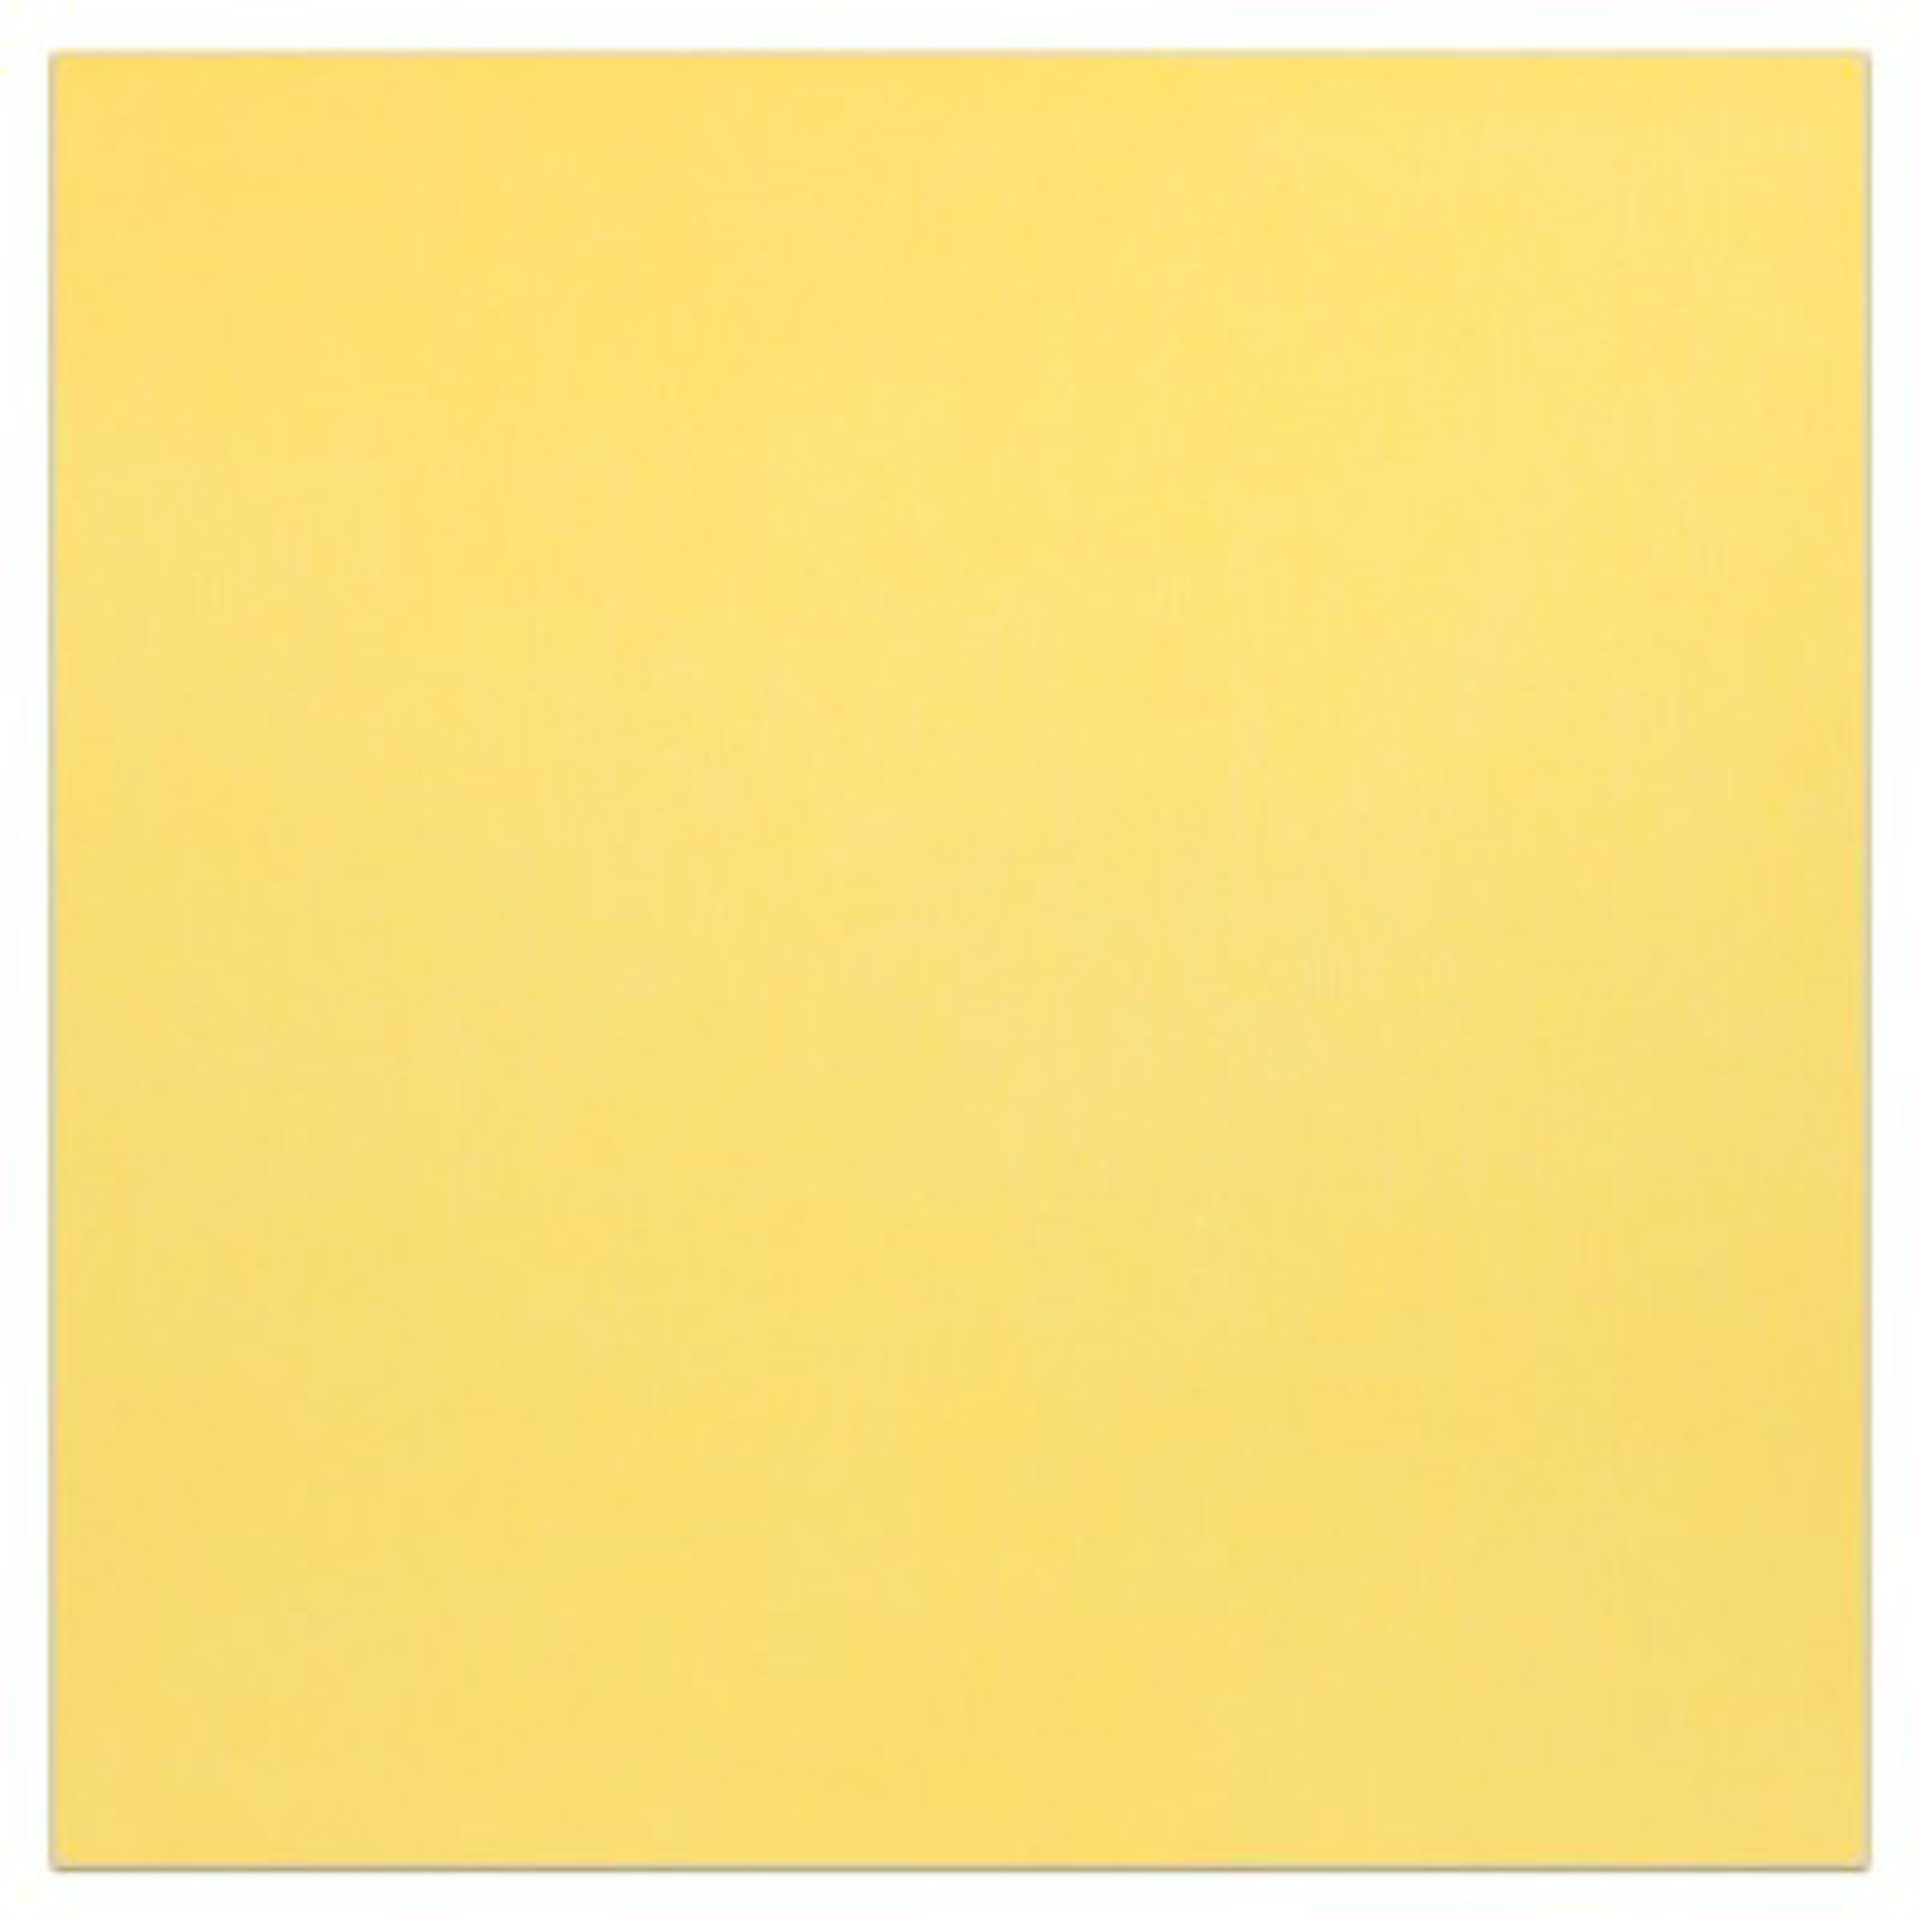 Yellow with White Lines, Vertical, Not Touching by Sol LeWitt